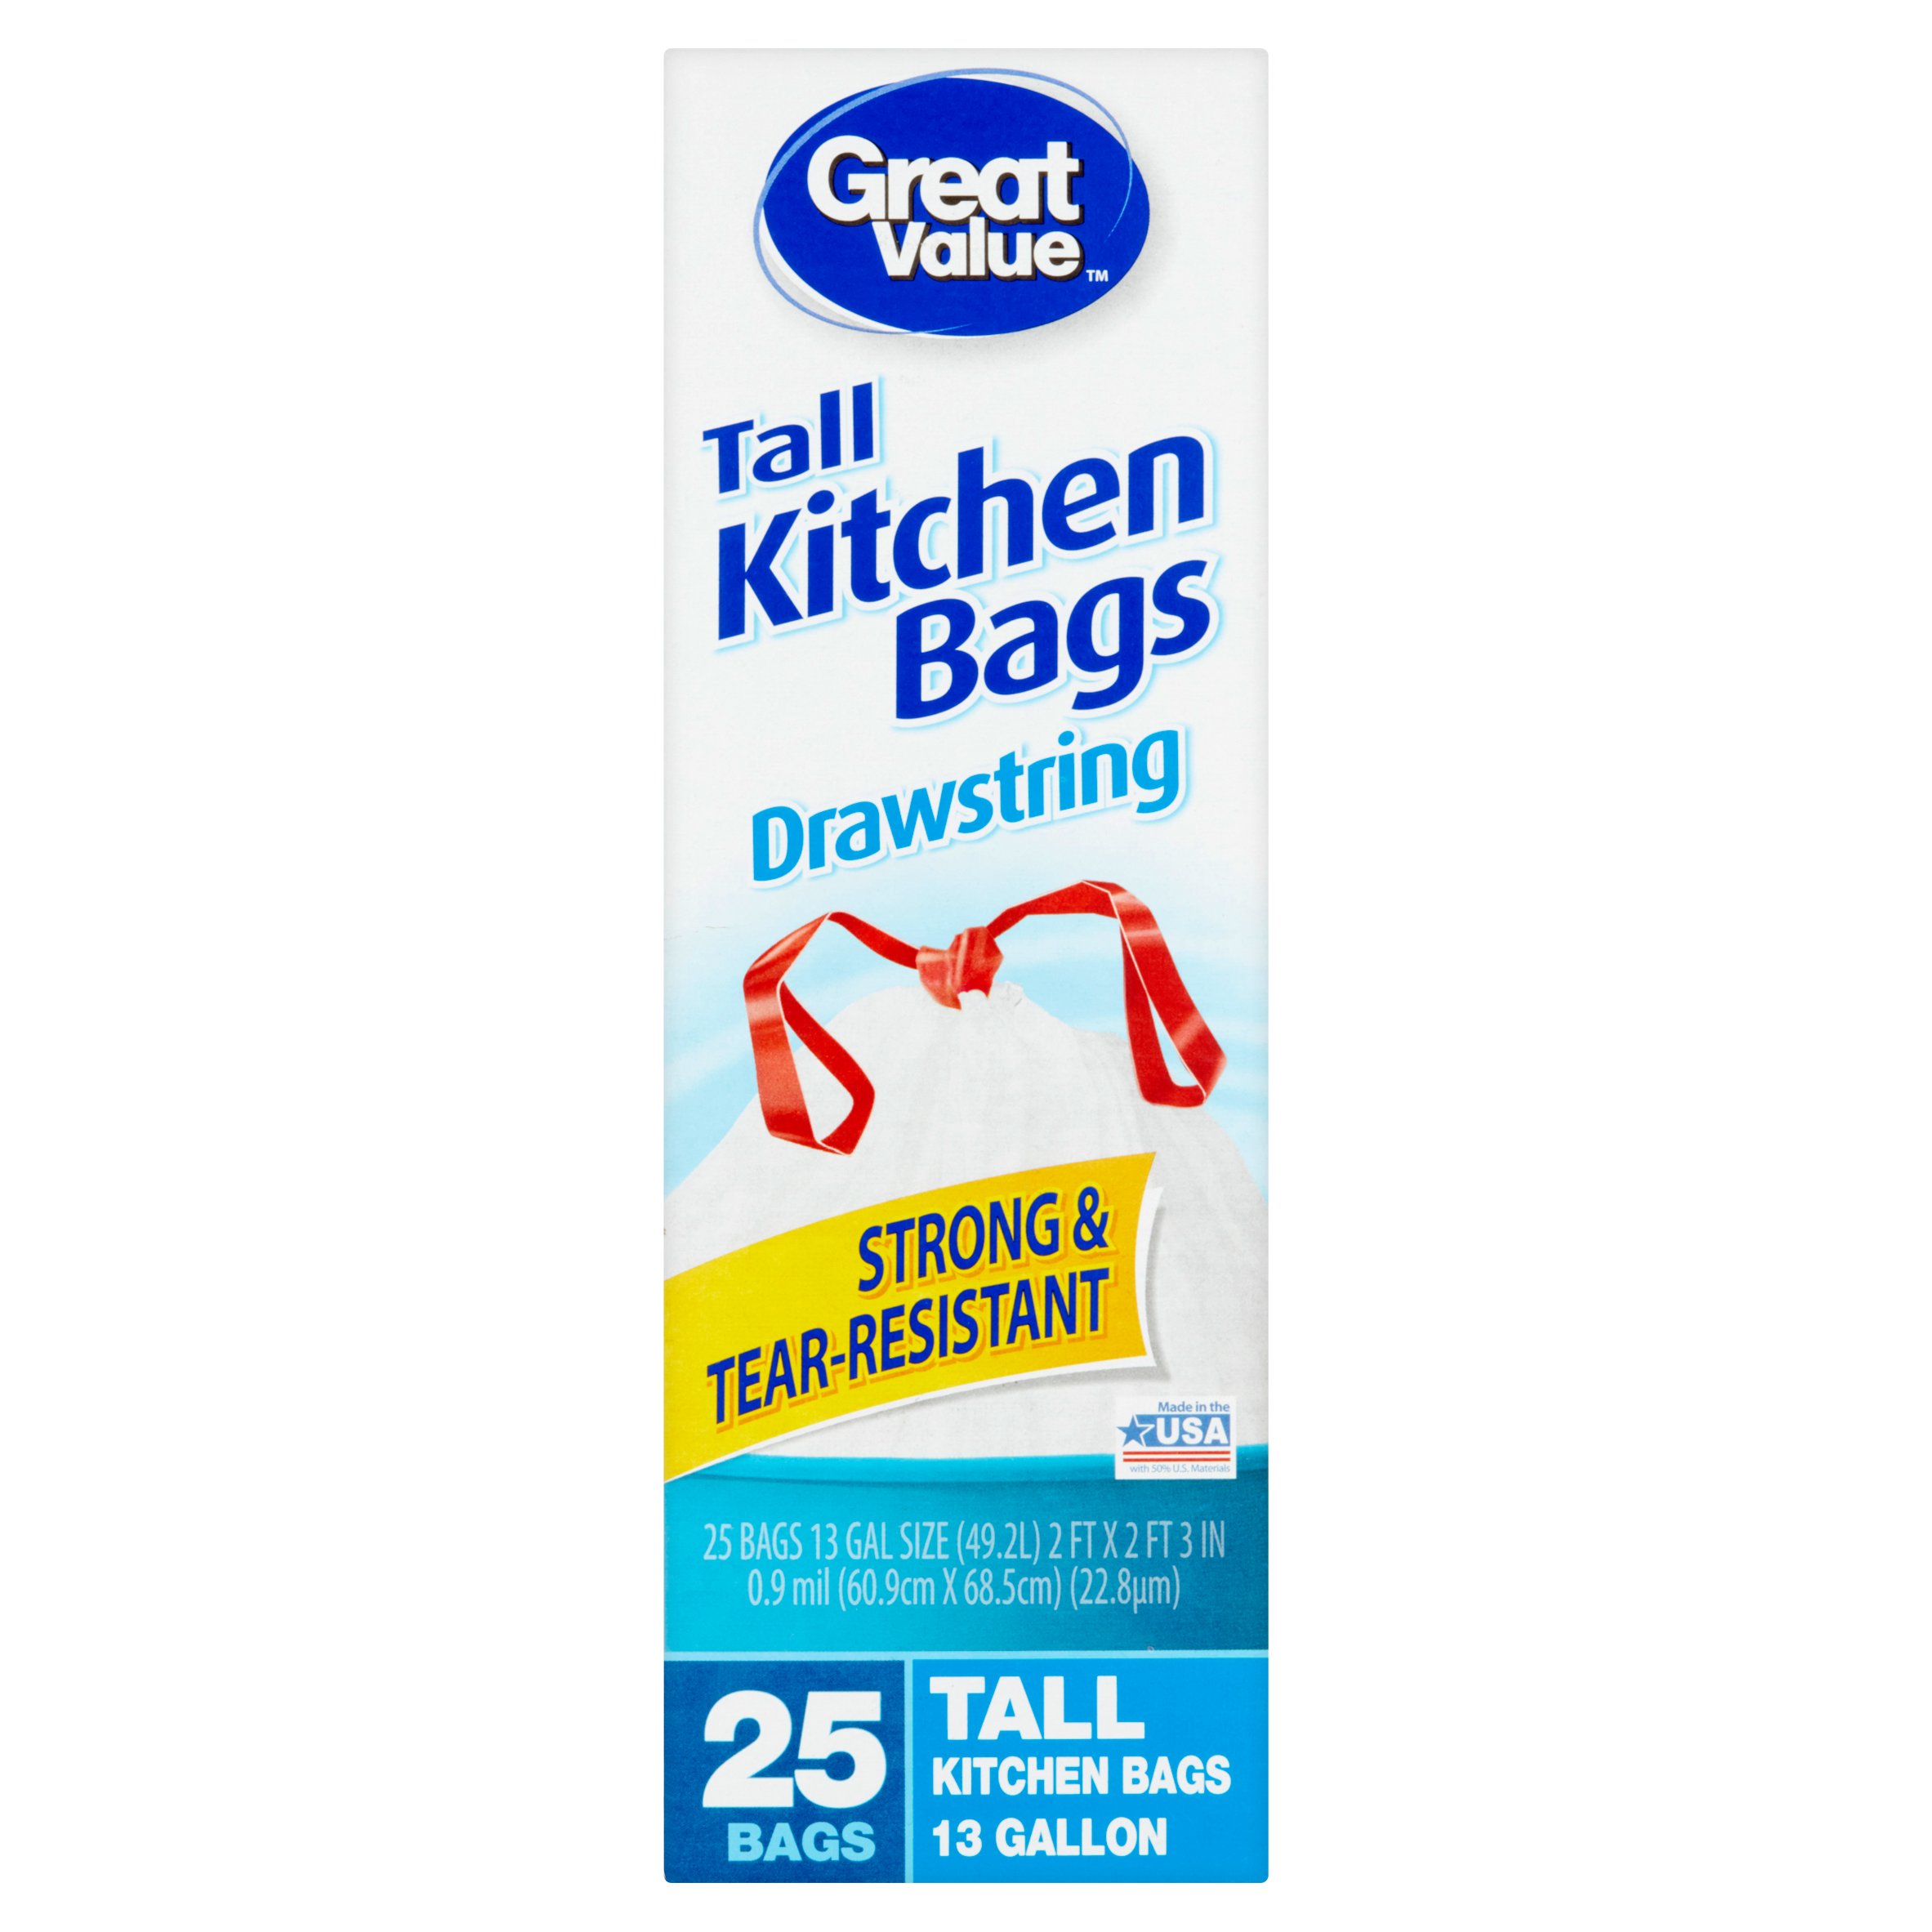 Great Value Tall Kitchen Drawstring Trash Bags, 13 Gallon, 25 Count - image 3 of 5